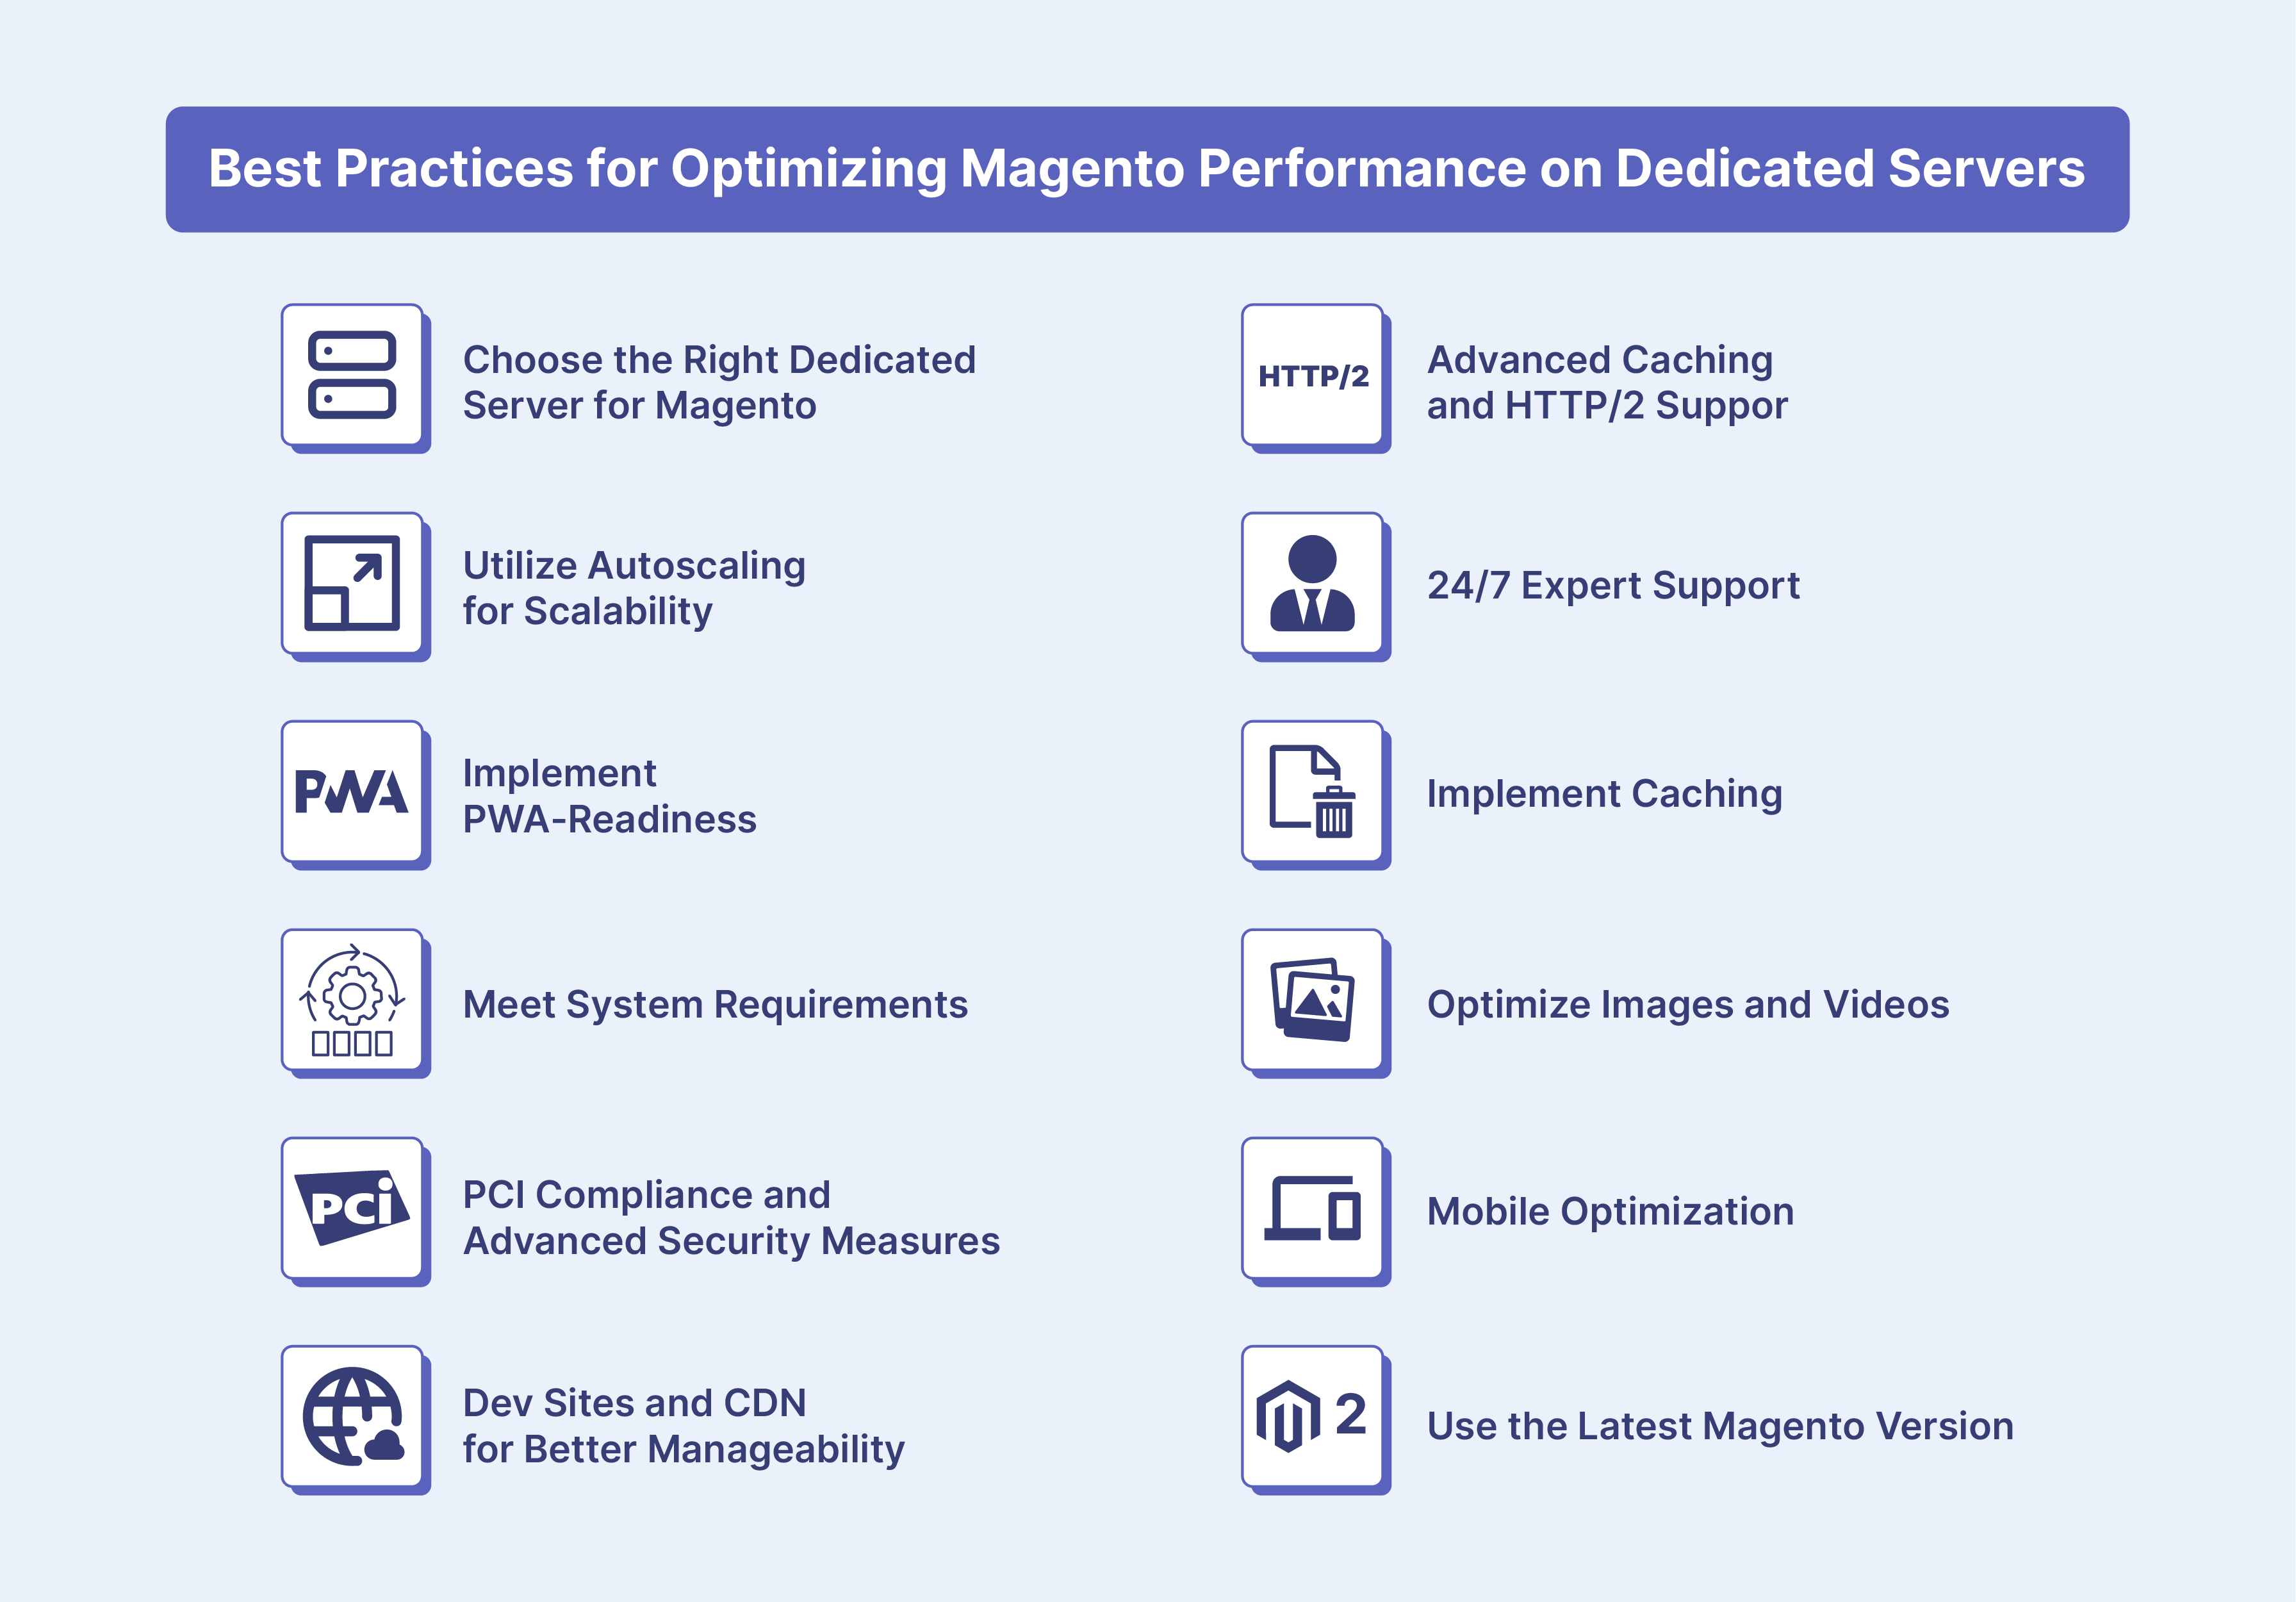 Key Practices for Optimizing Magento on Dedicated Servers